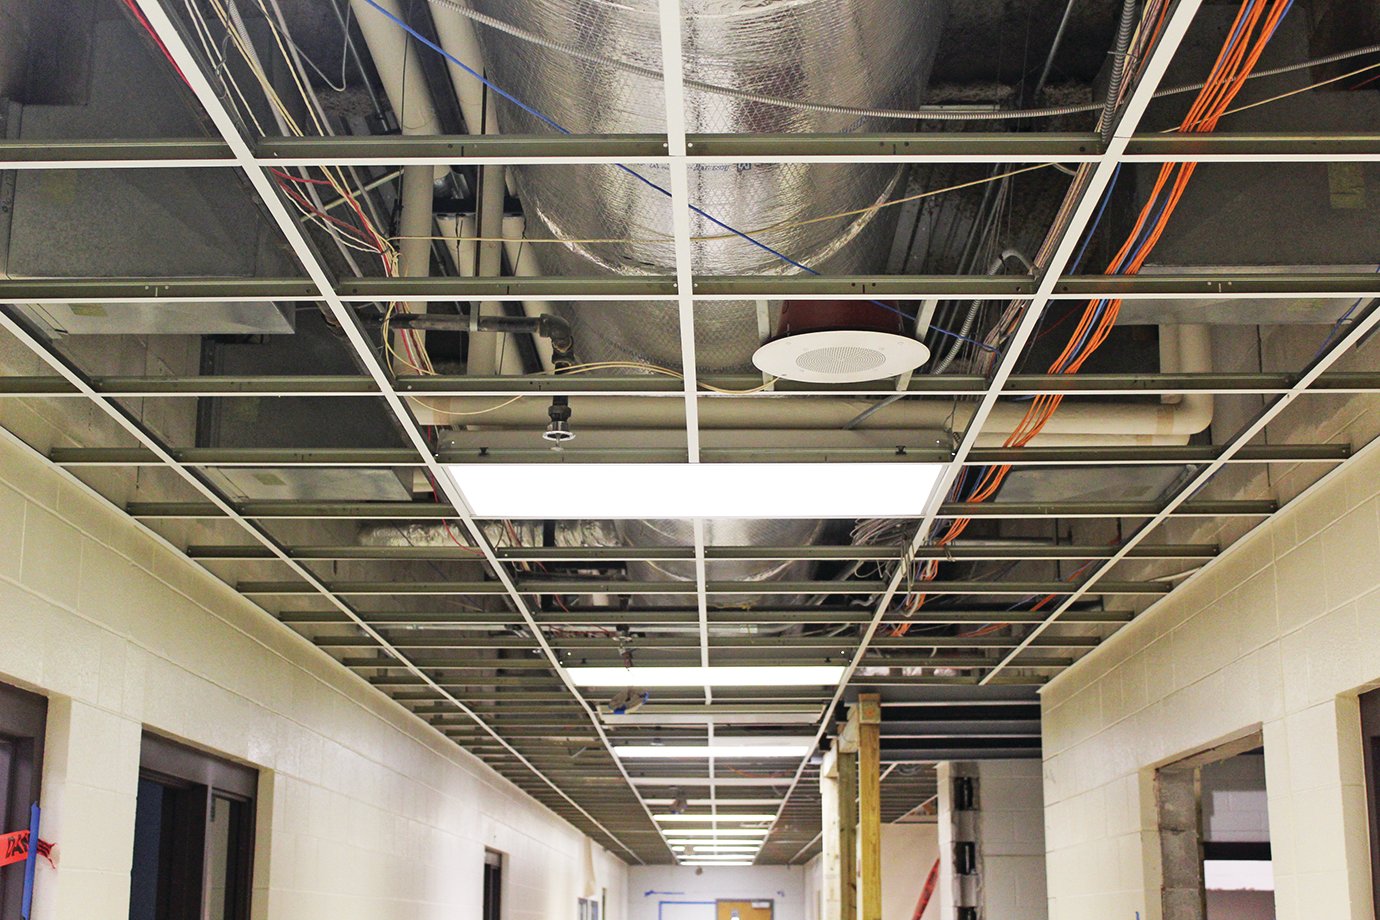 With ceiling tiles removed to expose wiring for workers, the northwest hallway on the first floor of  Crawfordsville High School is hardly recognizable.